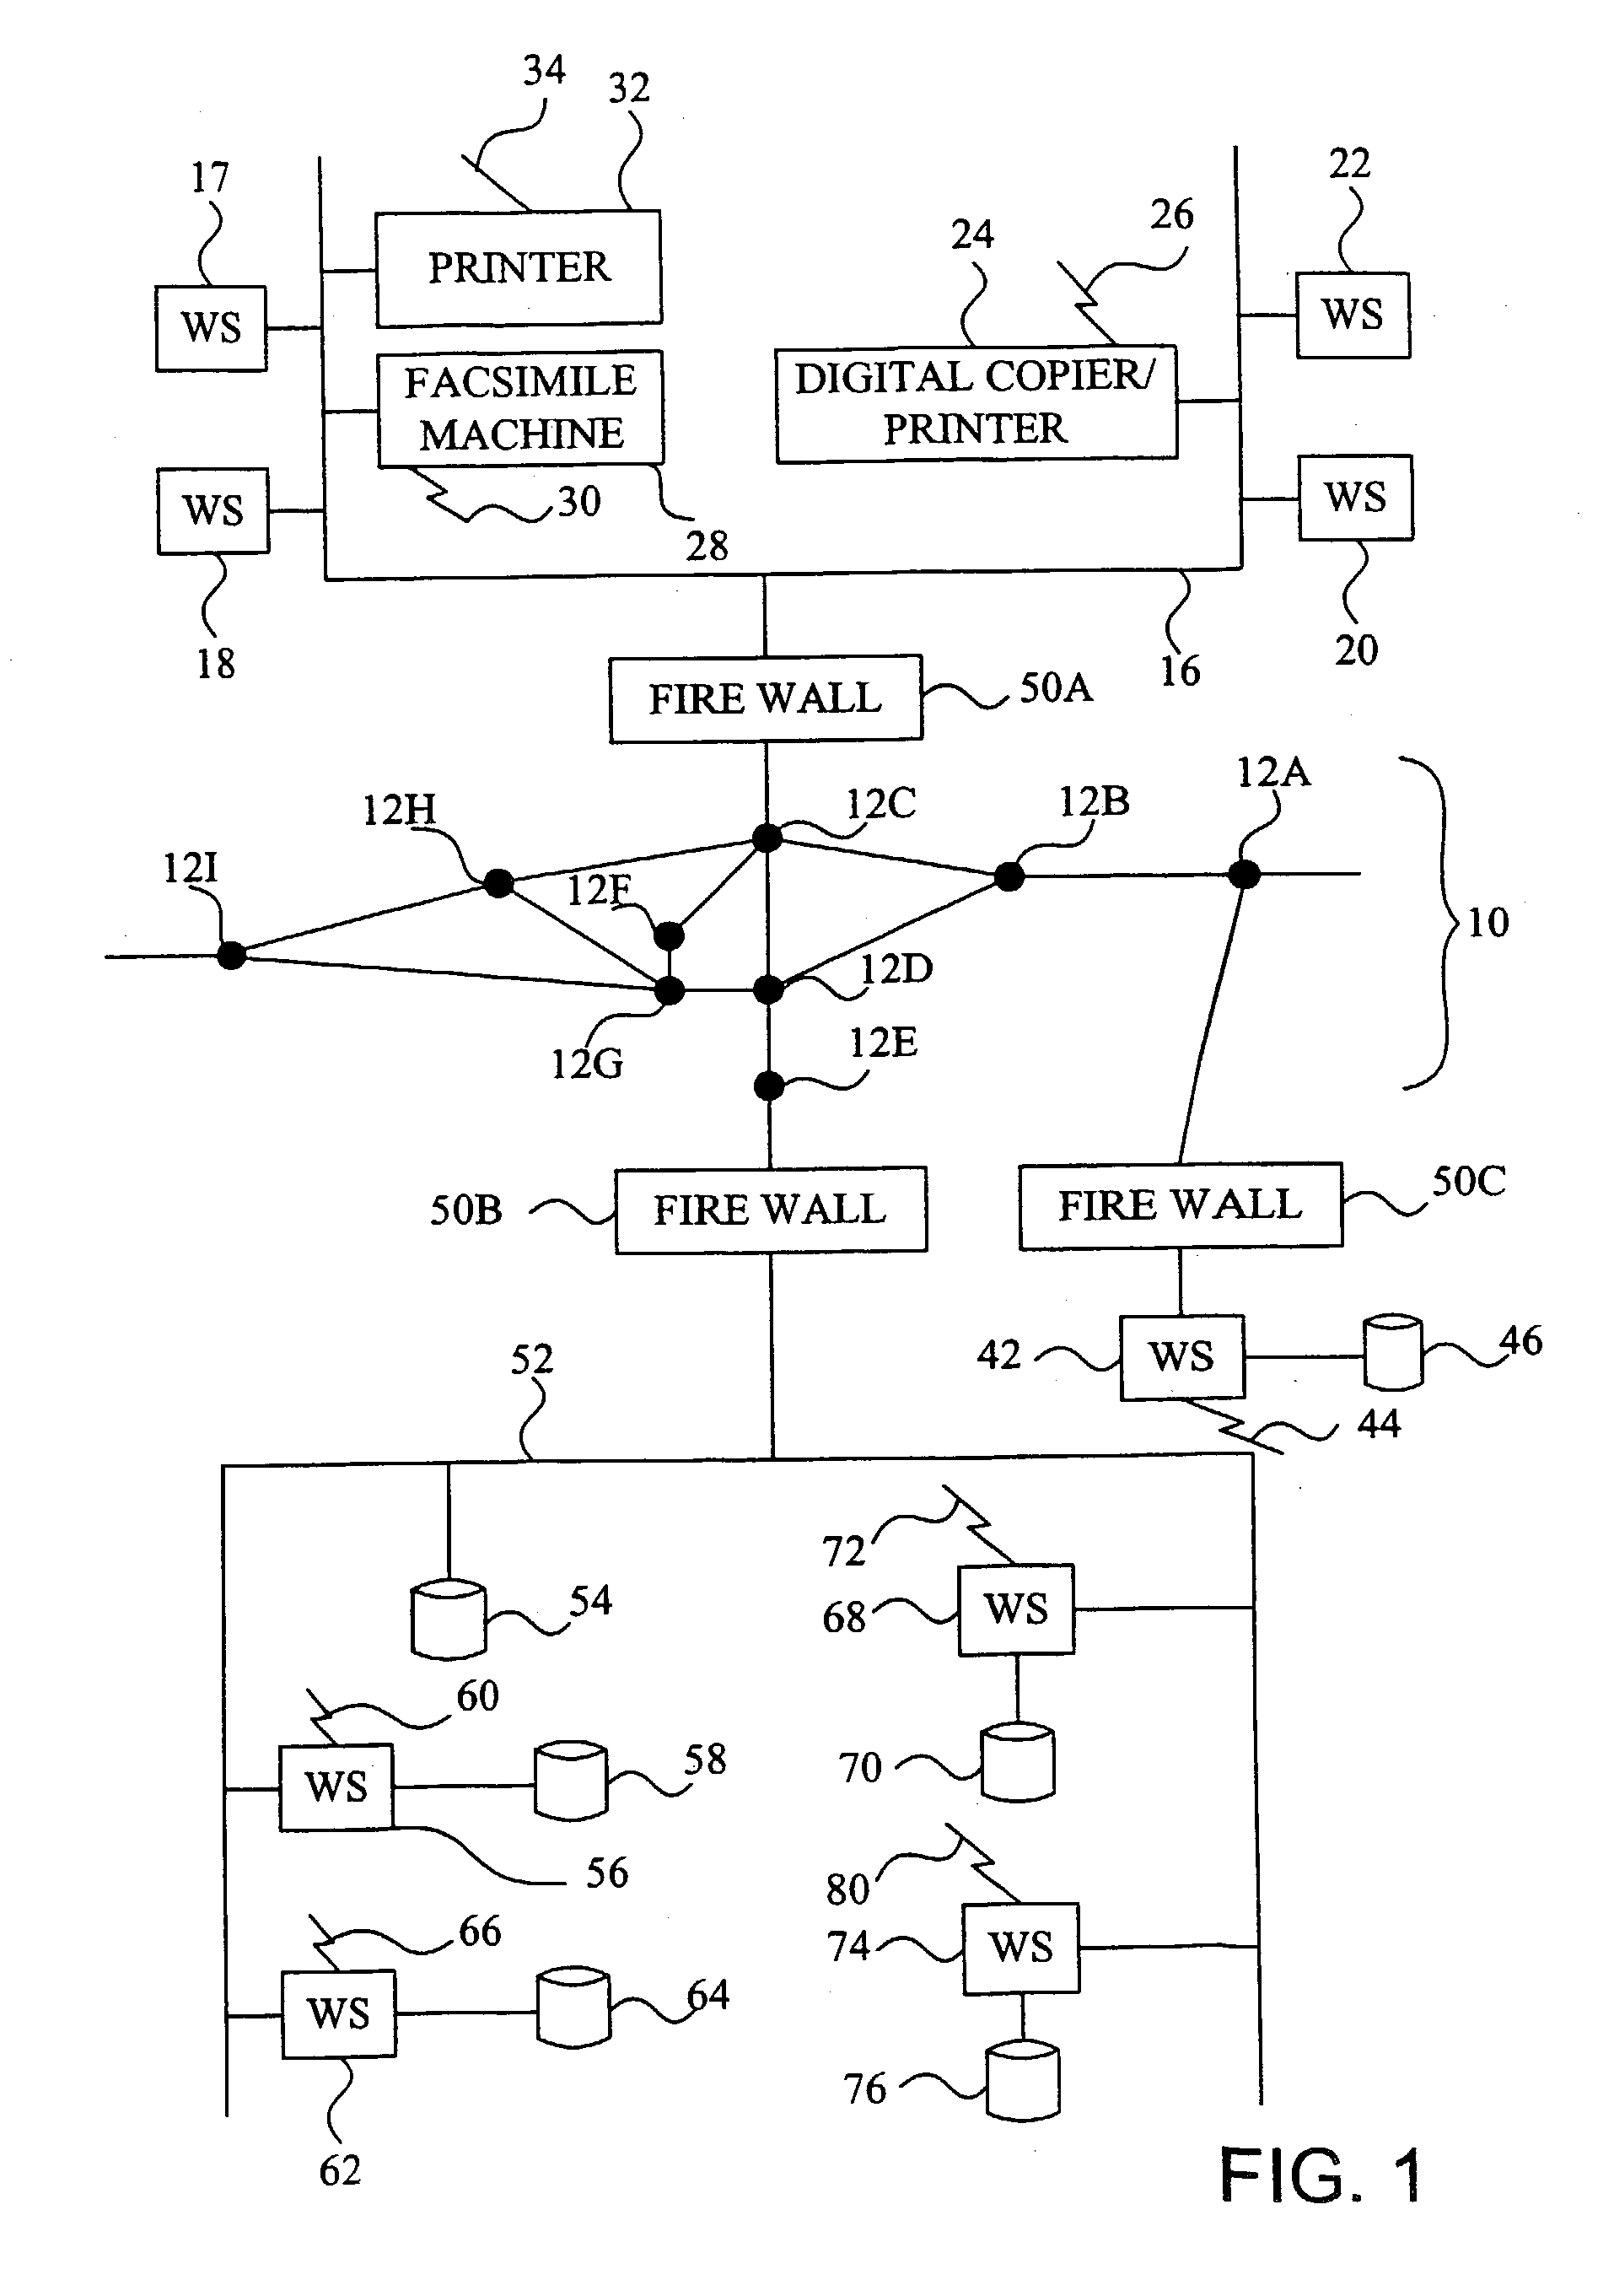 Method and system of remote monitoring and support of devices, extracting data from different types of email messages, and storing data according to data structures determined by the message types